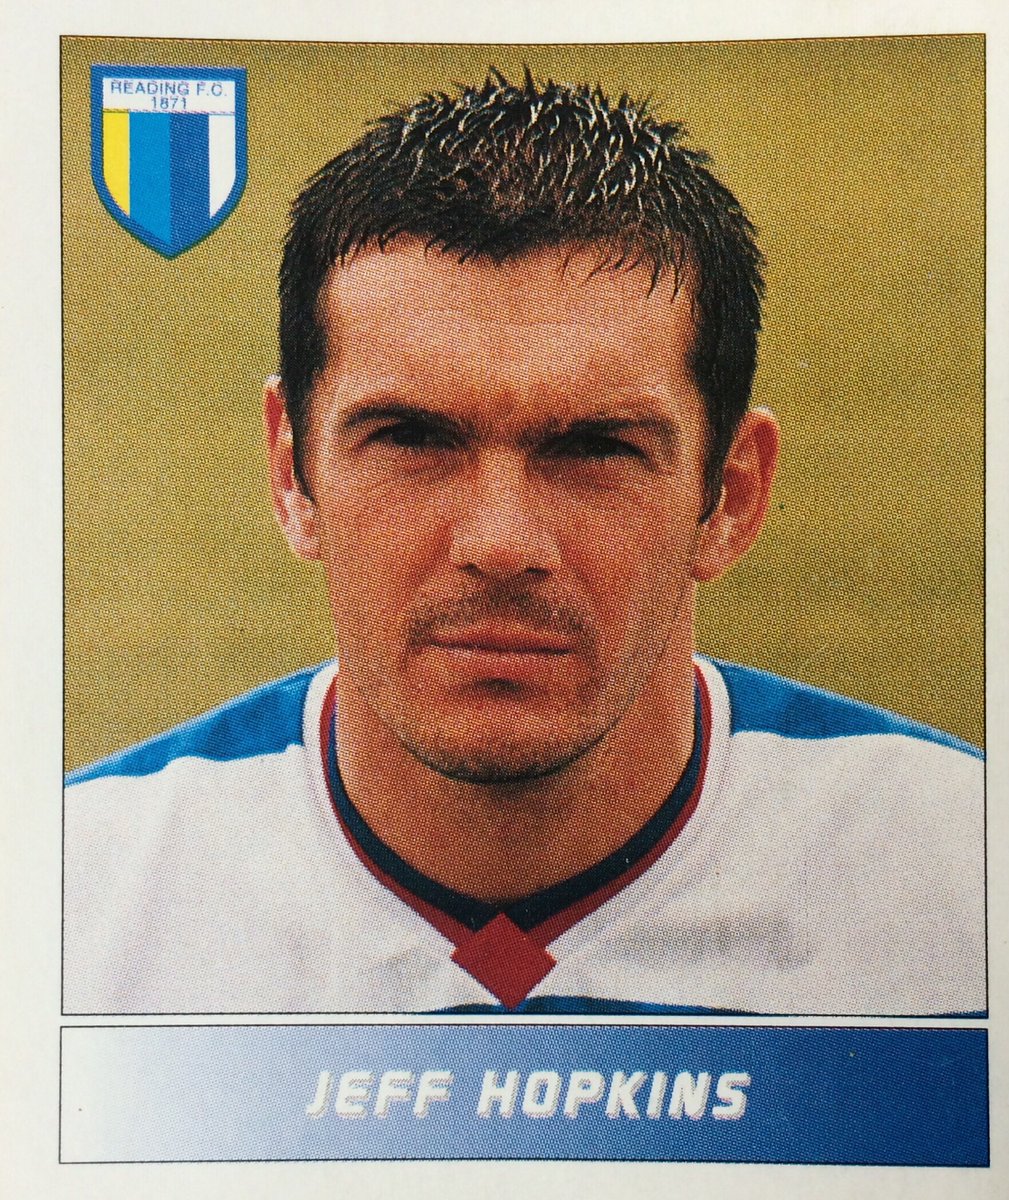 Happy 60th Birthday to Jeff Hopkins, #BOTD in 1964 – defender for Fulham, Crystal Palace, Bristol Rovers, Reading & Wales @FulhamFanZone @LBNo11FFC @WhiteNoise1879 @OneMorePoint1 @Palace1861 @WhyteleafeEagle @Played4TheGas @cribsie @HertsRoyal @OldRoyalsStuff @RoyalstilIdie